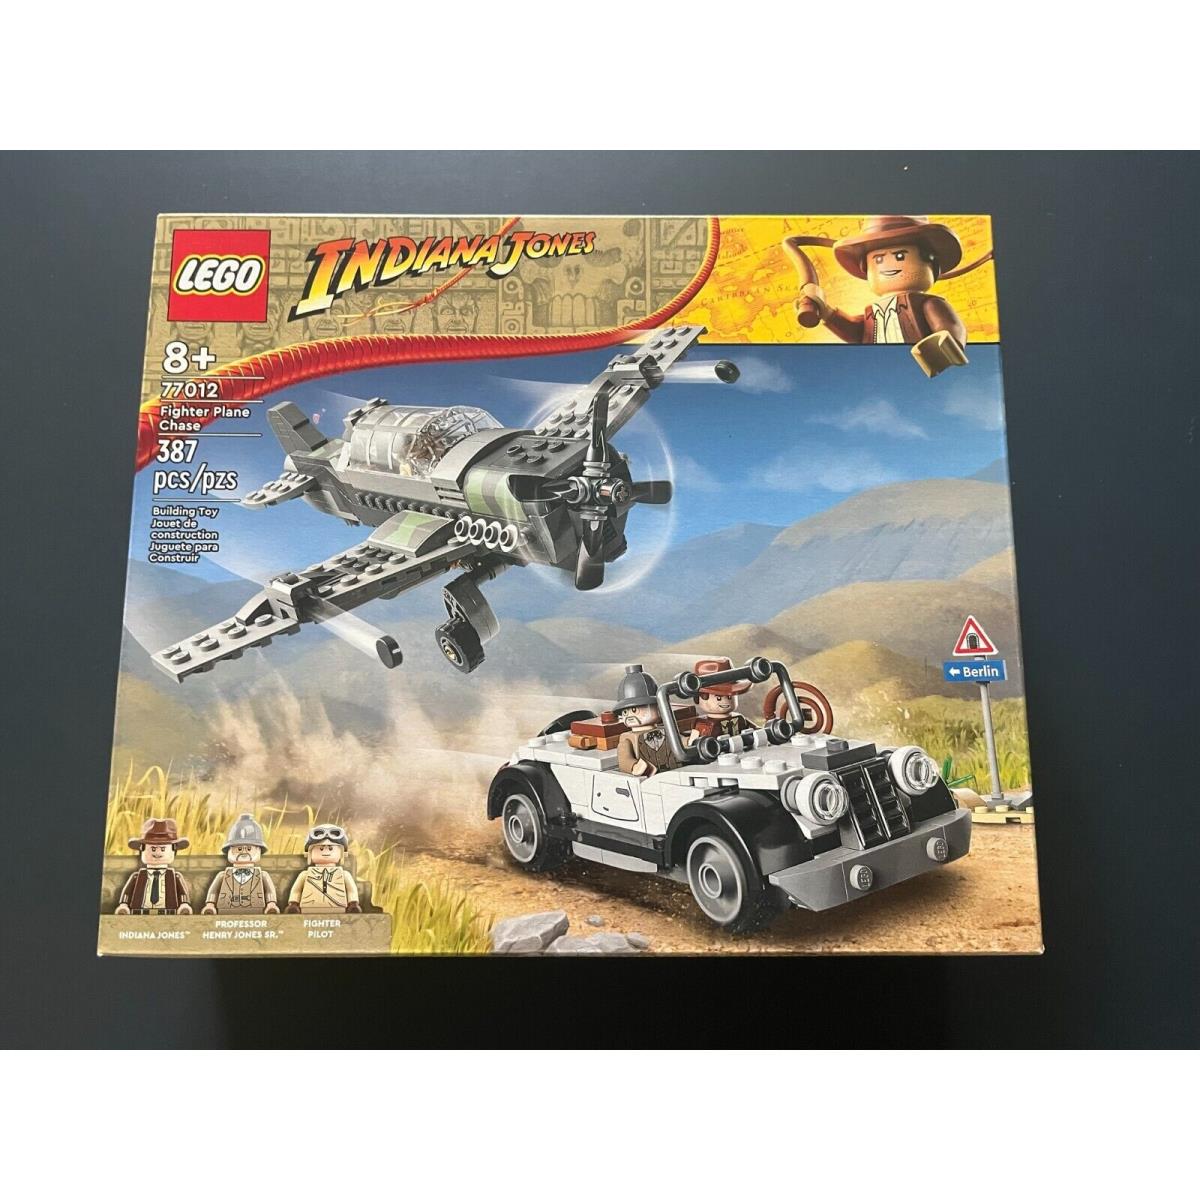 Lego Indiana Jones The Last Crusade Fighter Plane Chase 77012